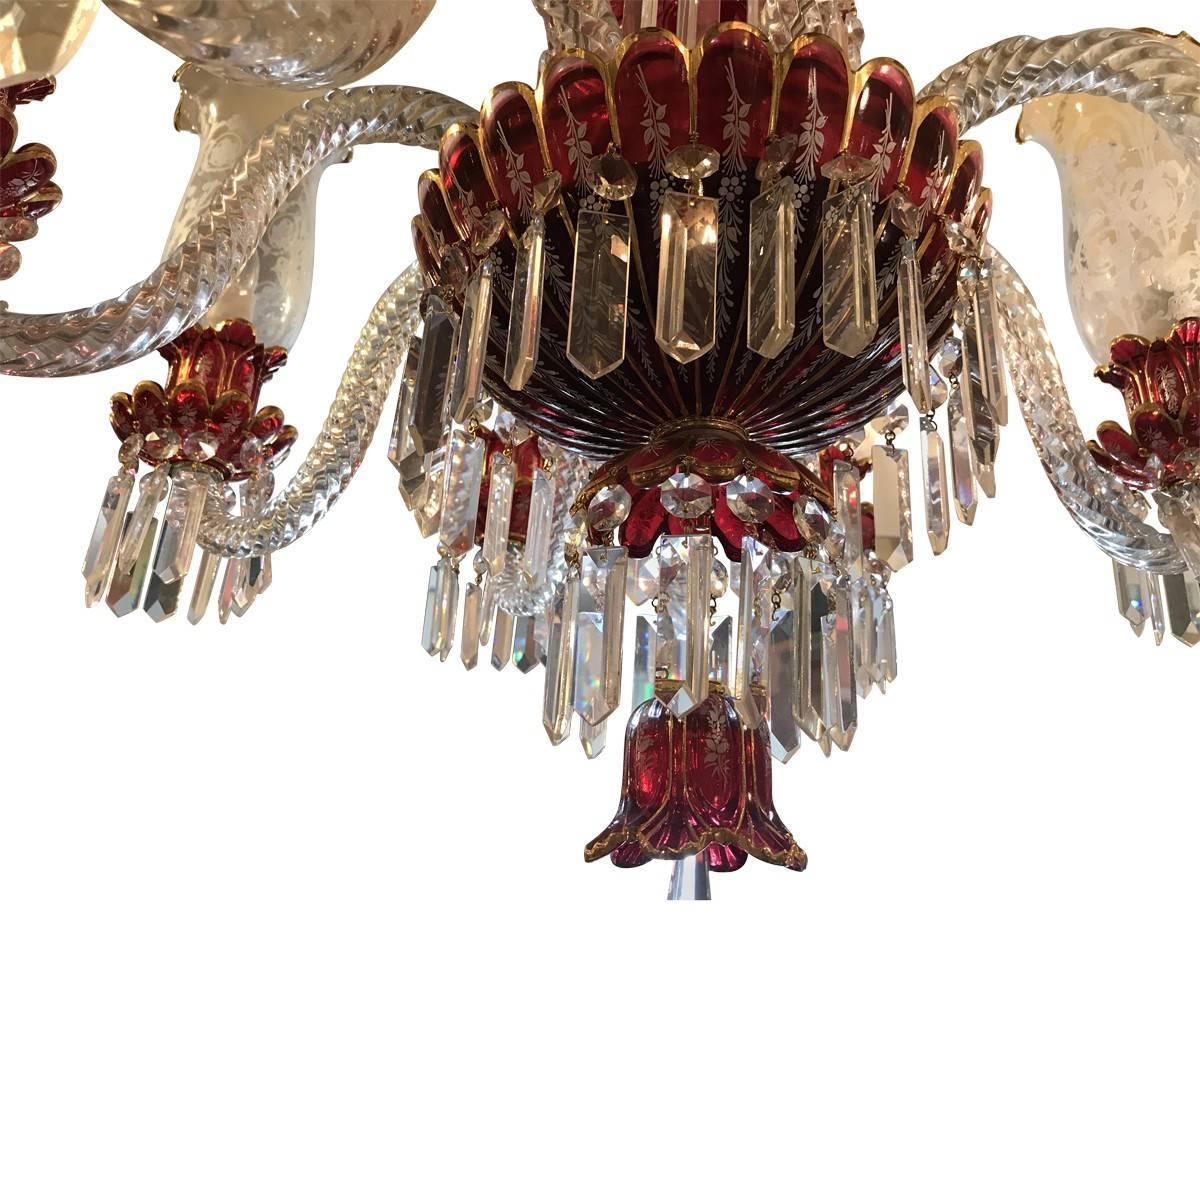 This beautiful Baccarat style bohemian chandelier combines traditional clear bohemian ruby glass crystals with bold colors. The cranberry red glass has a touch of elegance only this chandelier has to make a striking statement. Its beauty lies in its